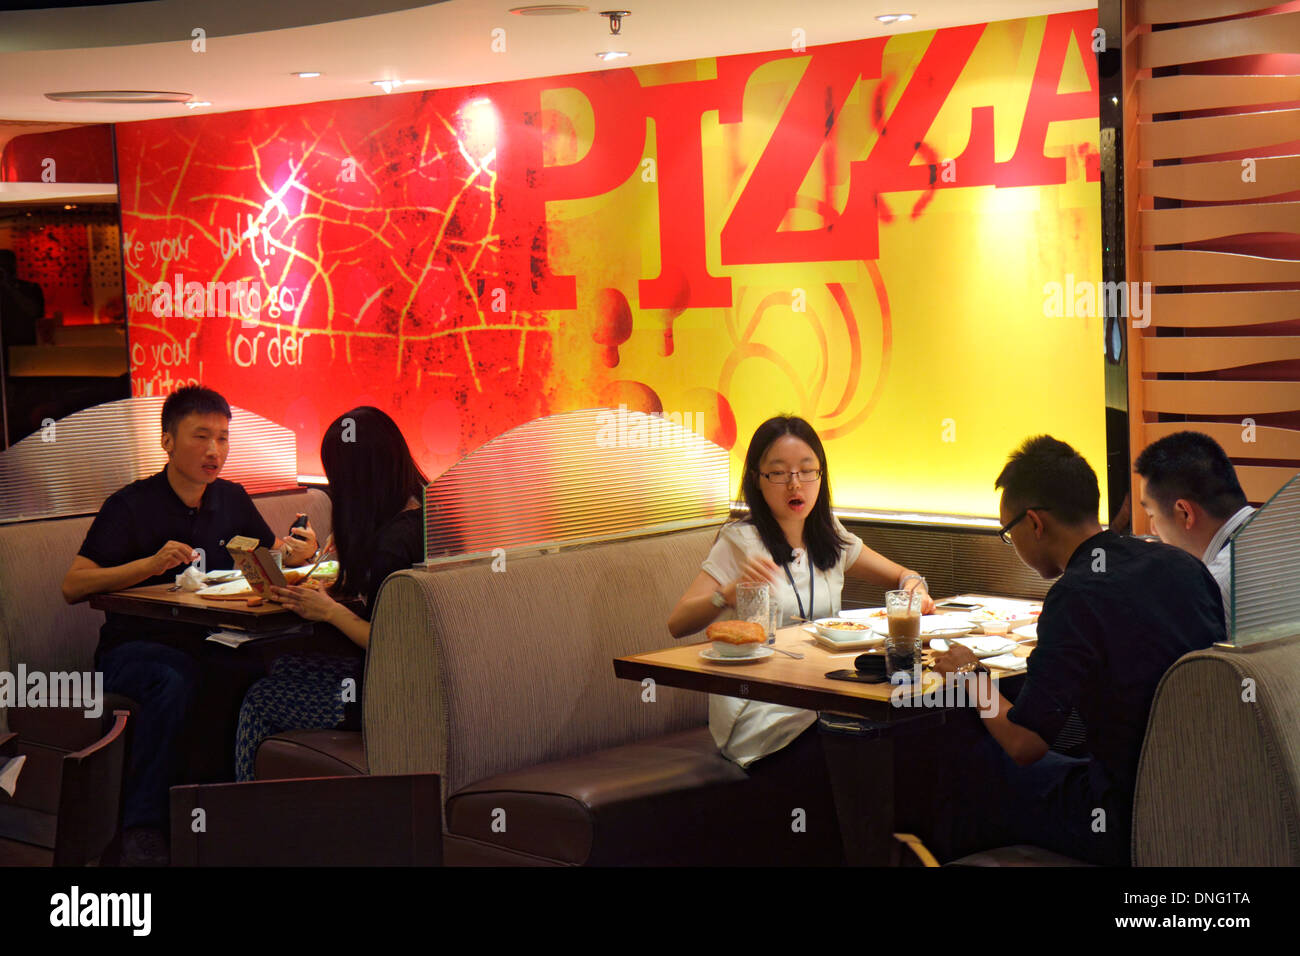 Beijing China,Chinese,The Malls at Oriental Plaza,Pizza Hut,restaurant restaurants food dining cafe cafes,cuisine,food,interior inside,Asian woman fem Stock Photo